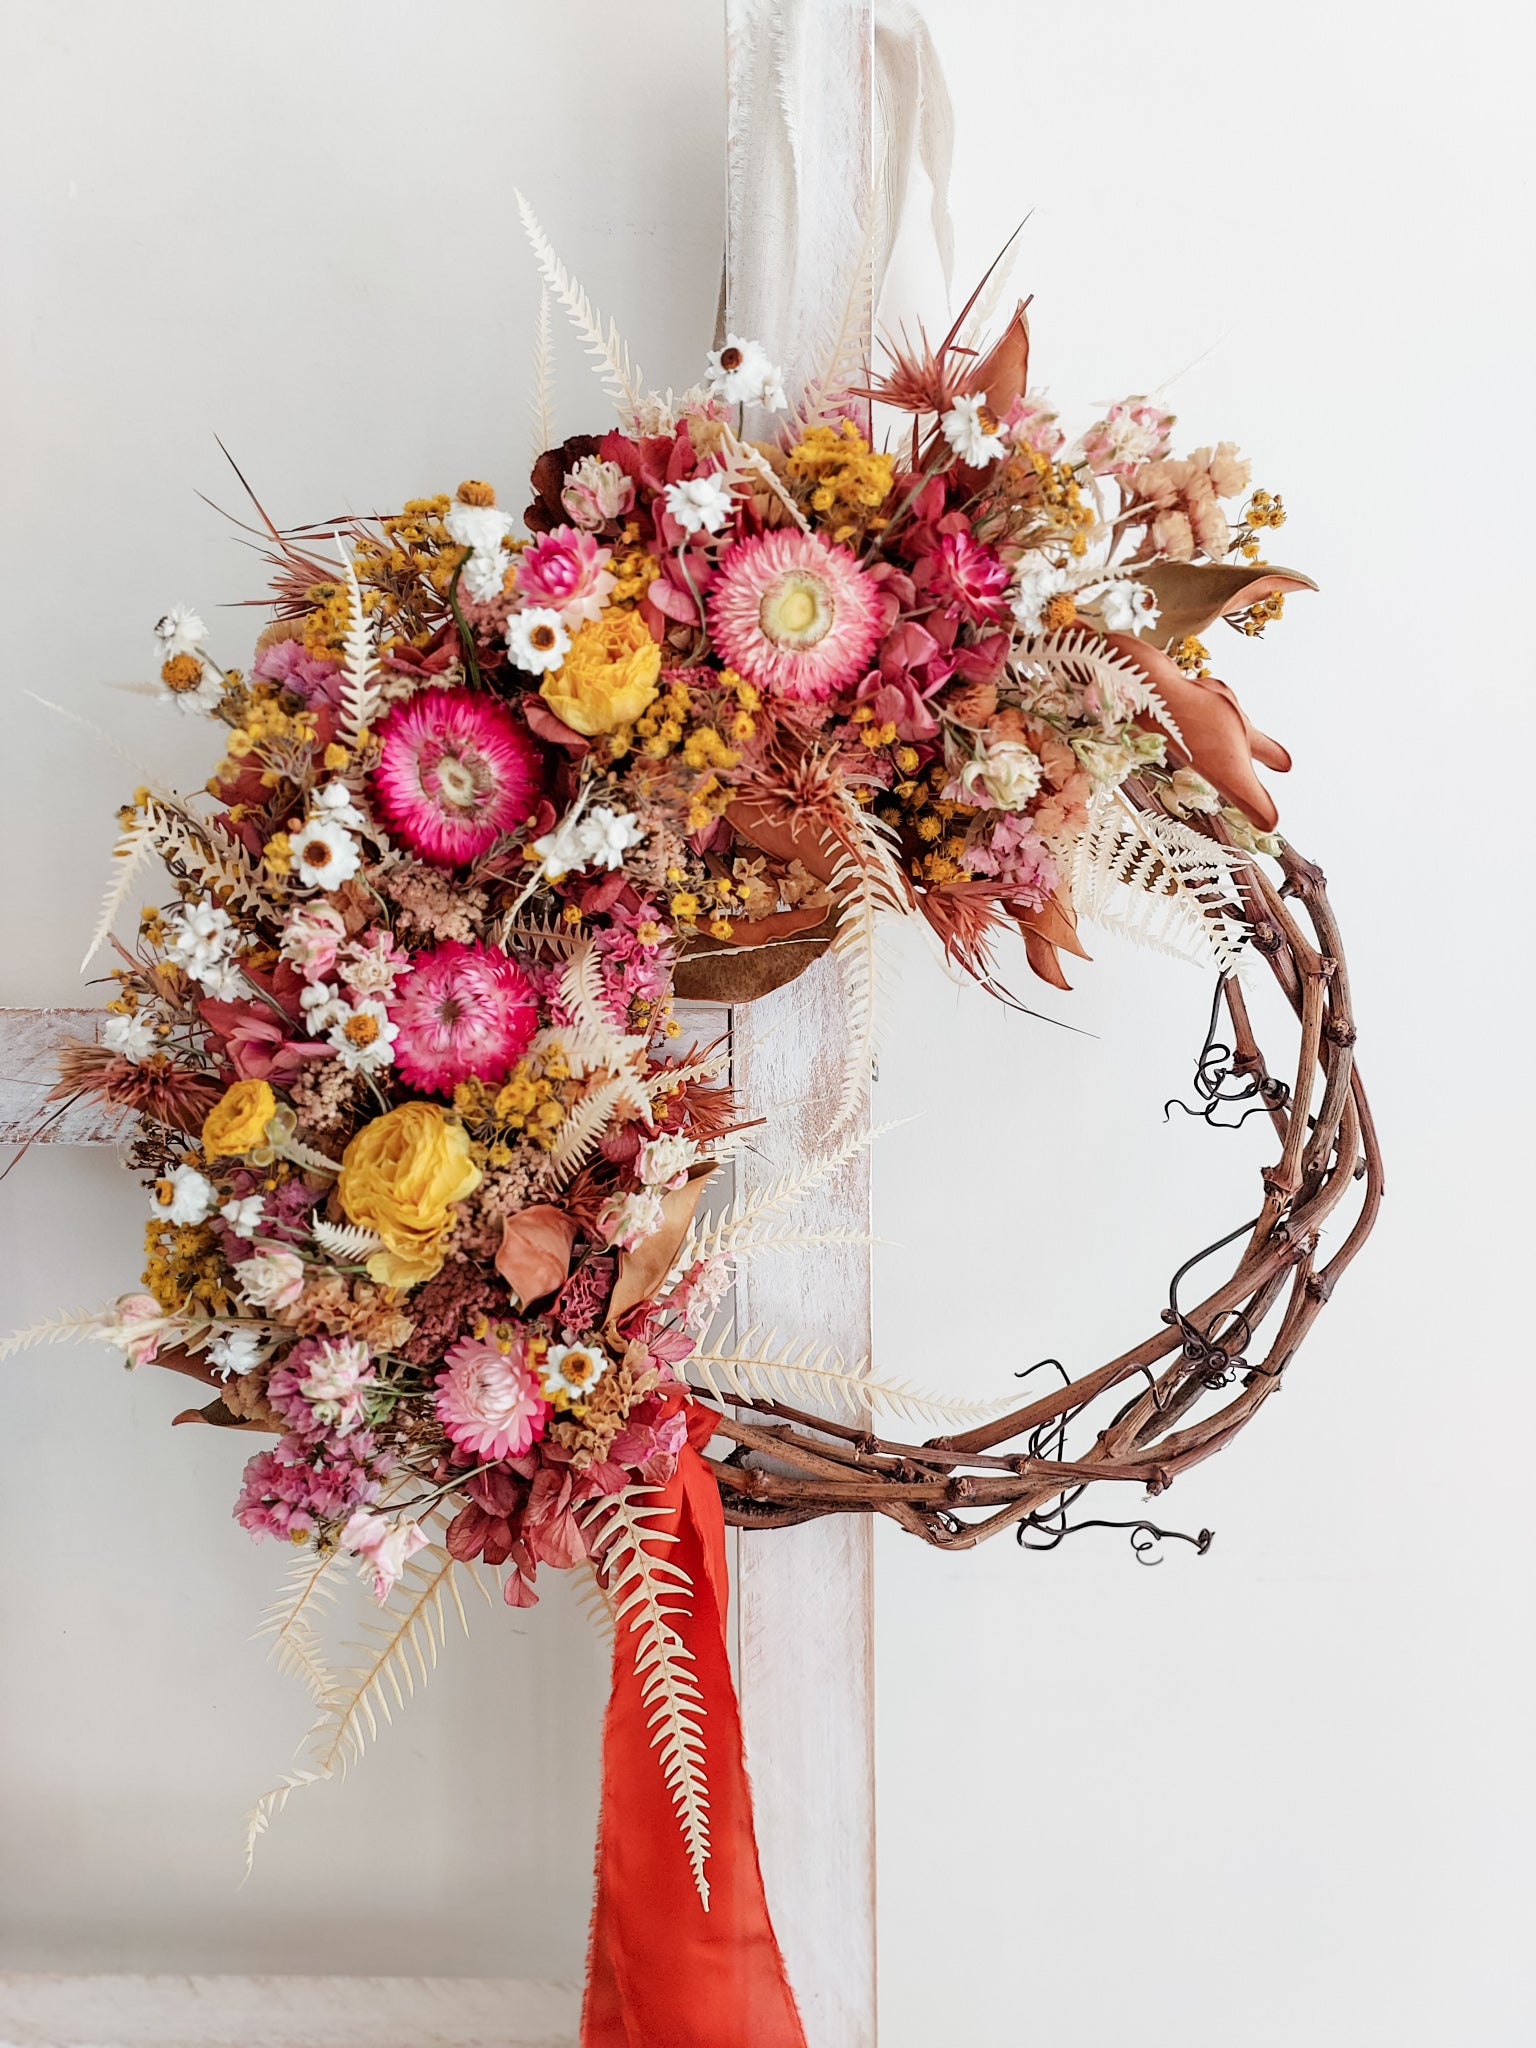 Dried flower wreath in bright pinks and yellows on a grapevine base.